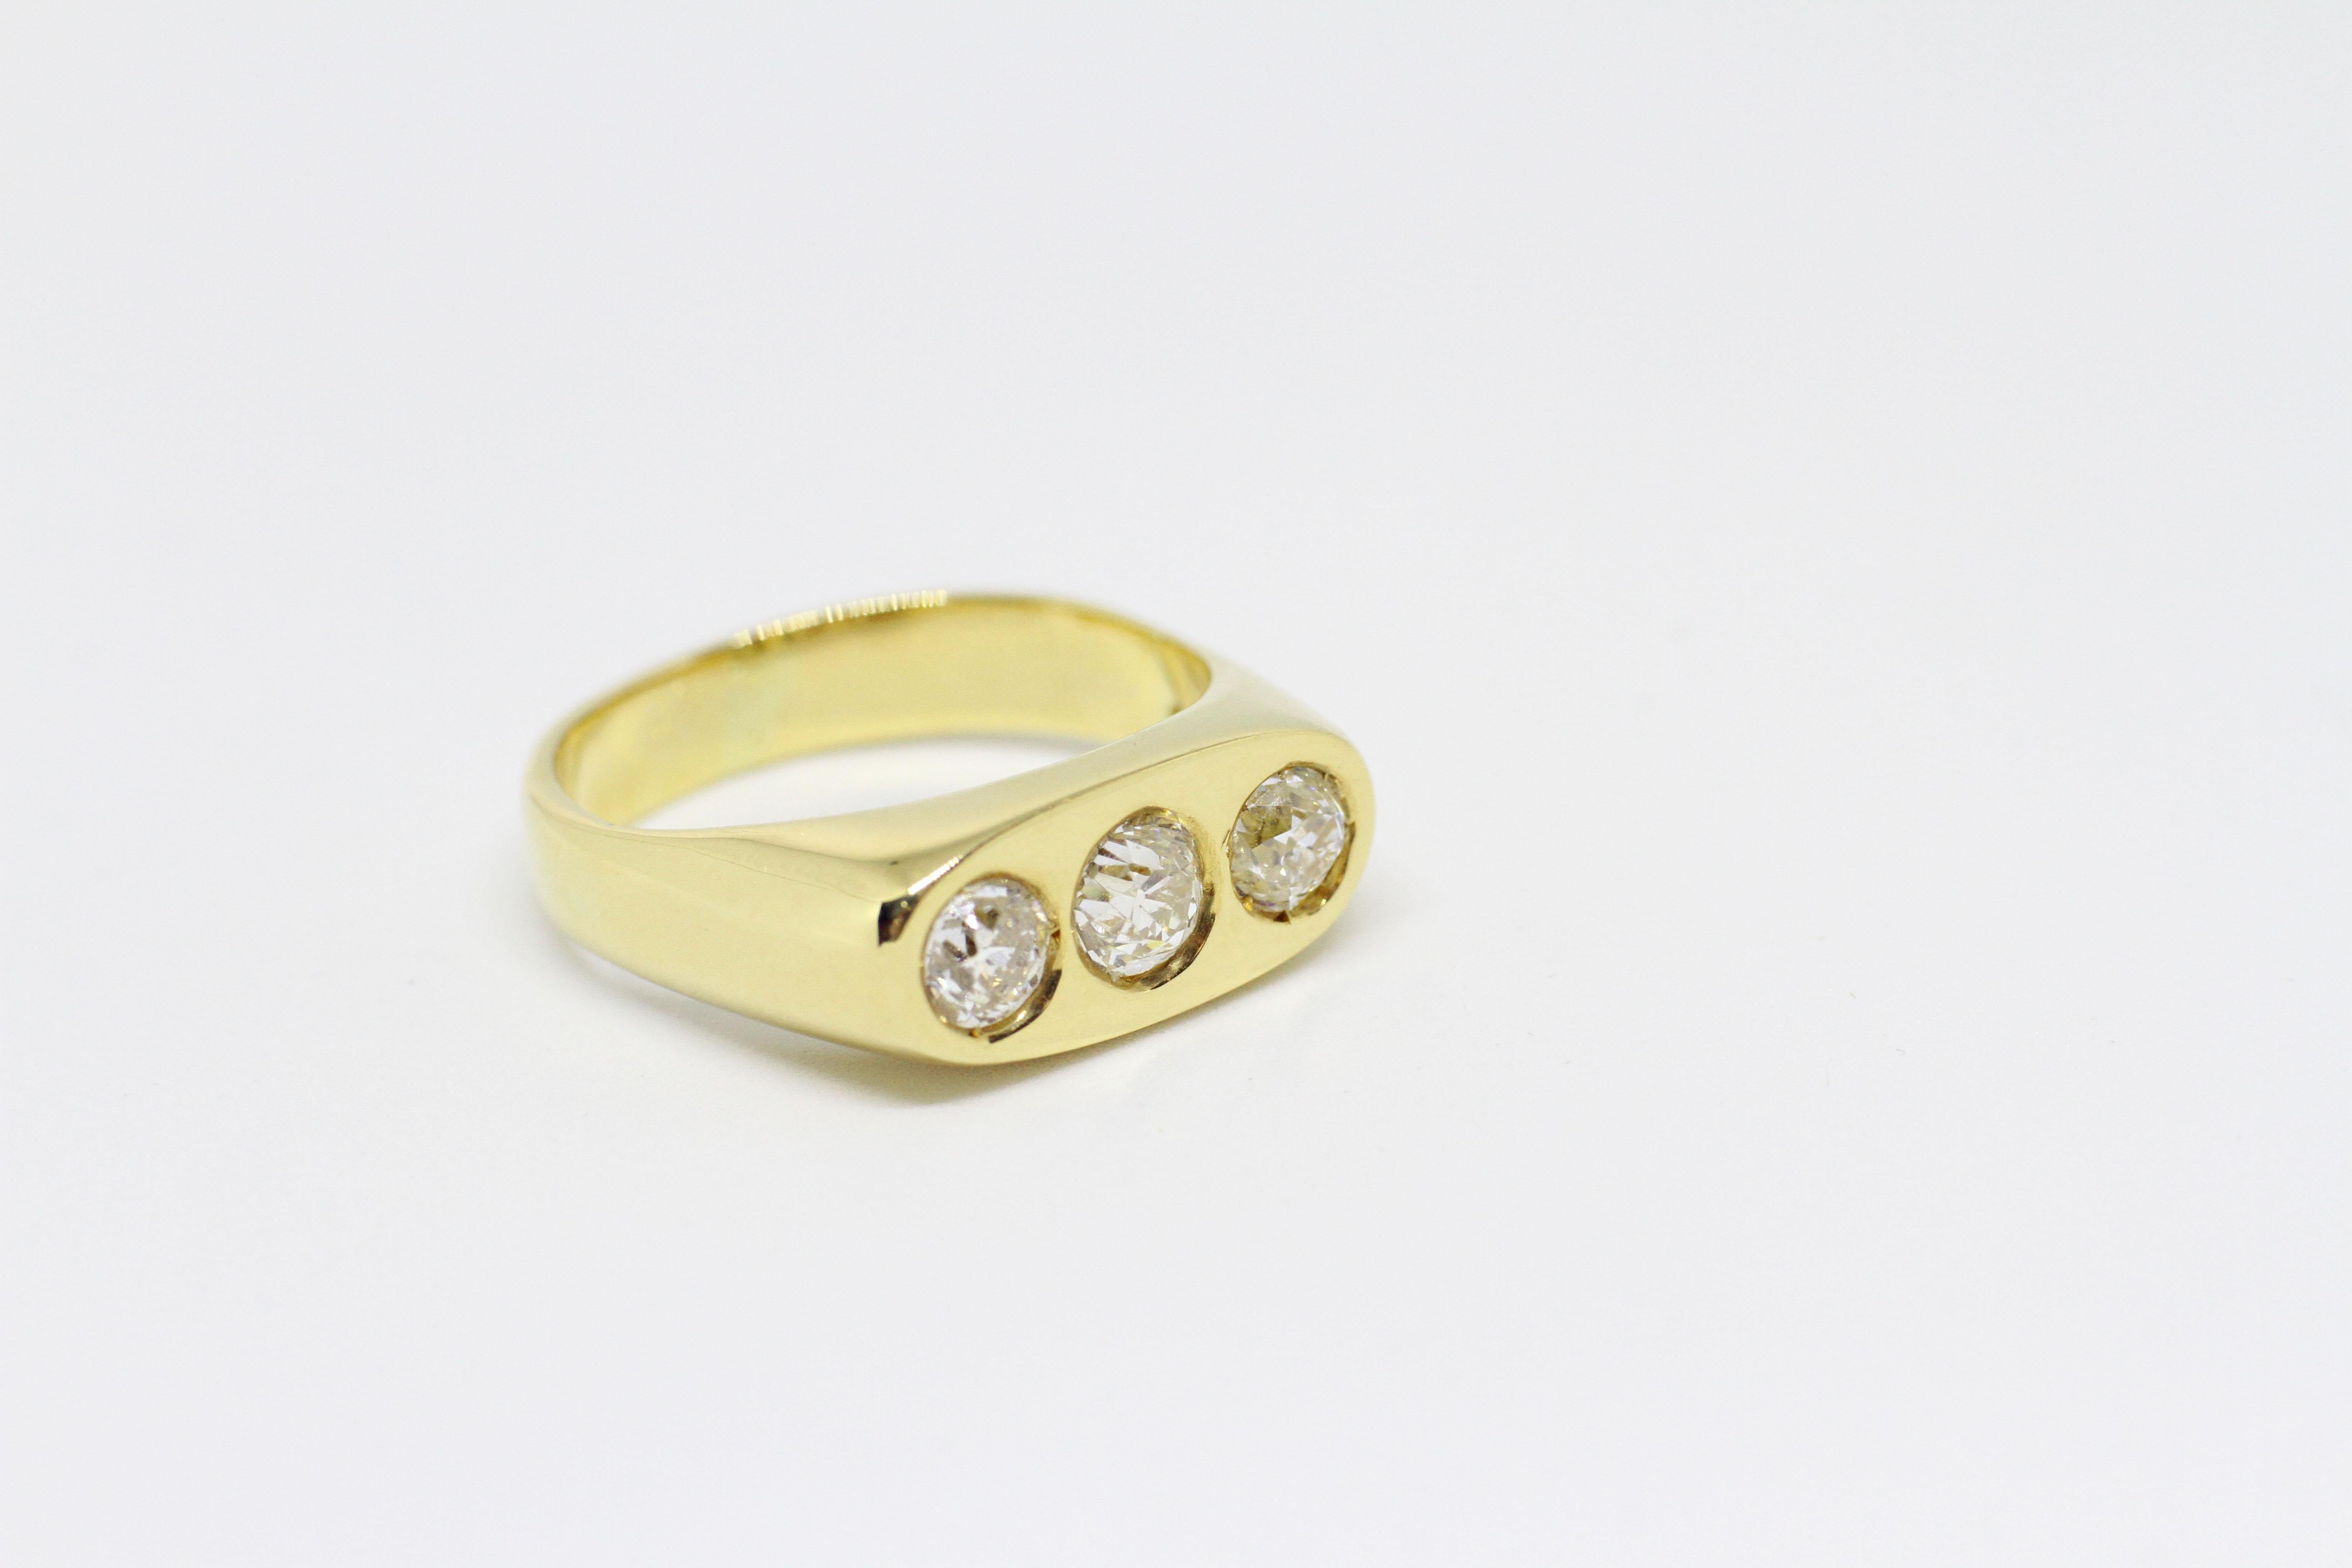 Yellow gold gents solid 'Gypsy' ring set with three old cut diamonds in rub-over settings weighing a total of 1.59 carats. Flat plate top moving to a solid court shaped shank of 4.5mm-5mm. Tested 18 carat yellow gold. English. Stones set later in